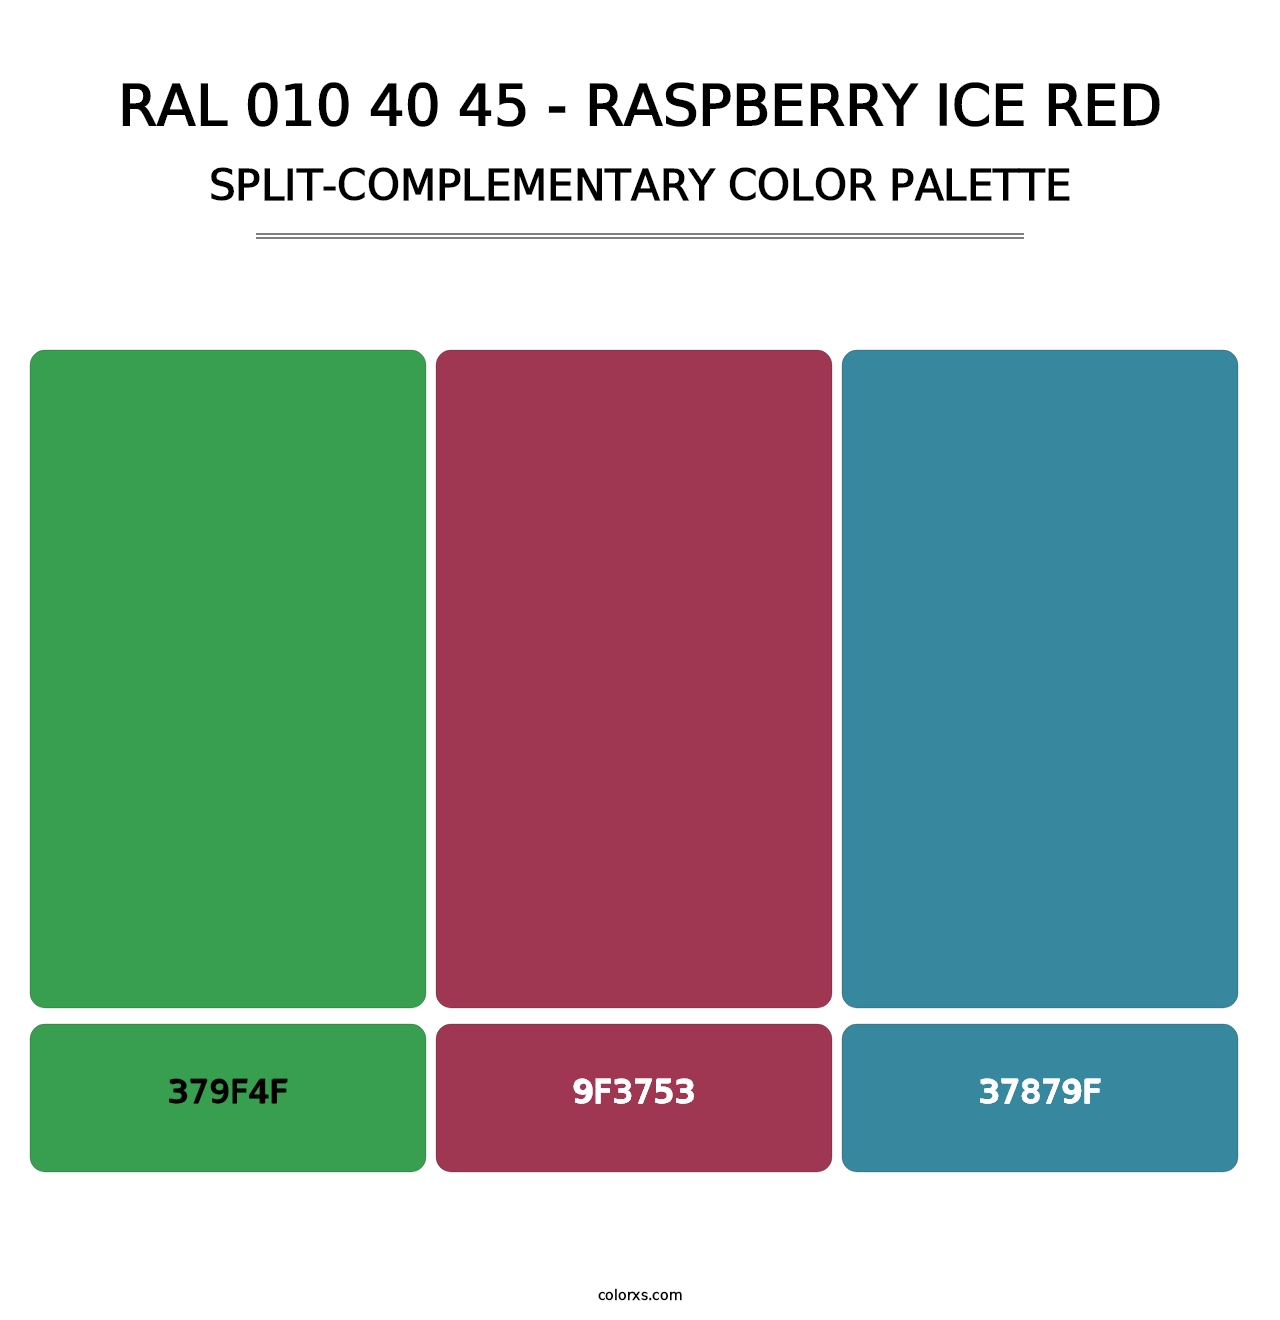 RAL 010 40 45 - Raspberry Ice Red - Split-Complementary Color Palette